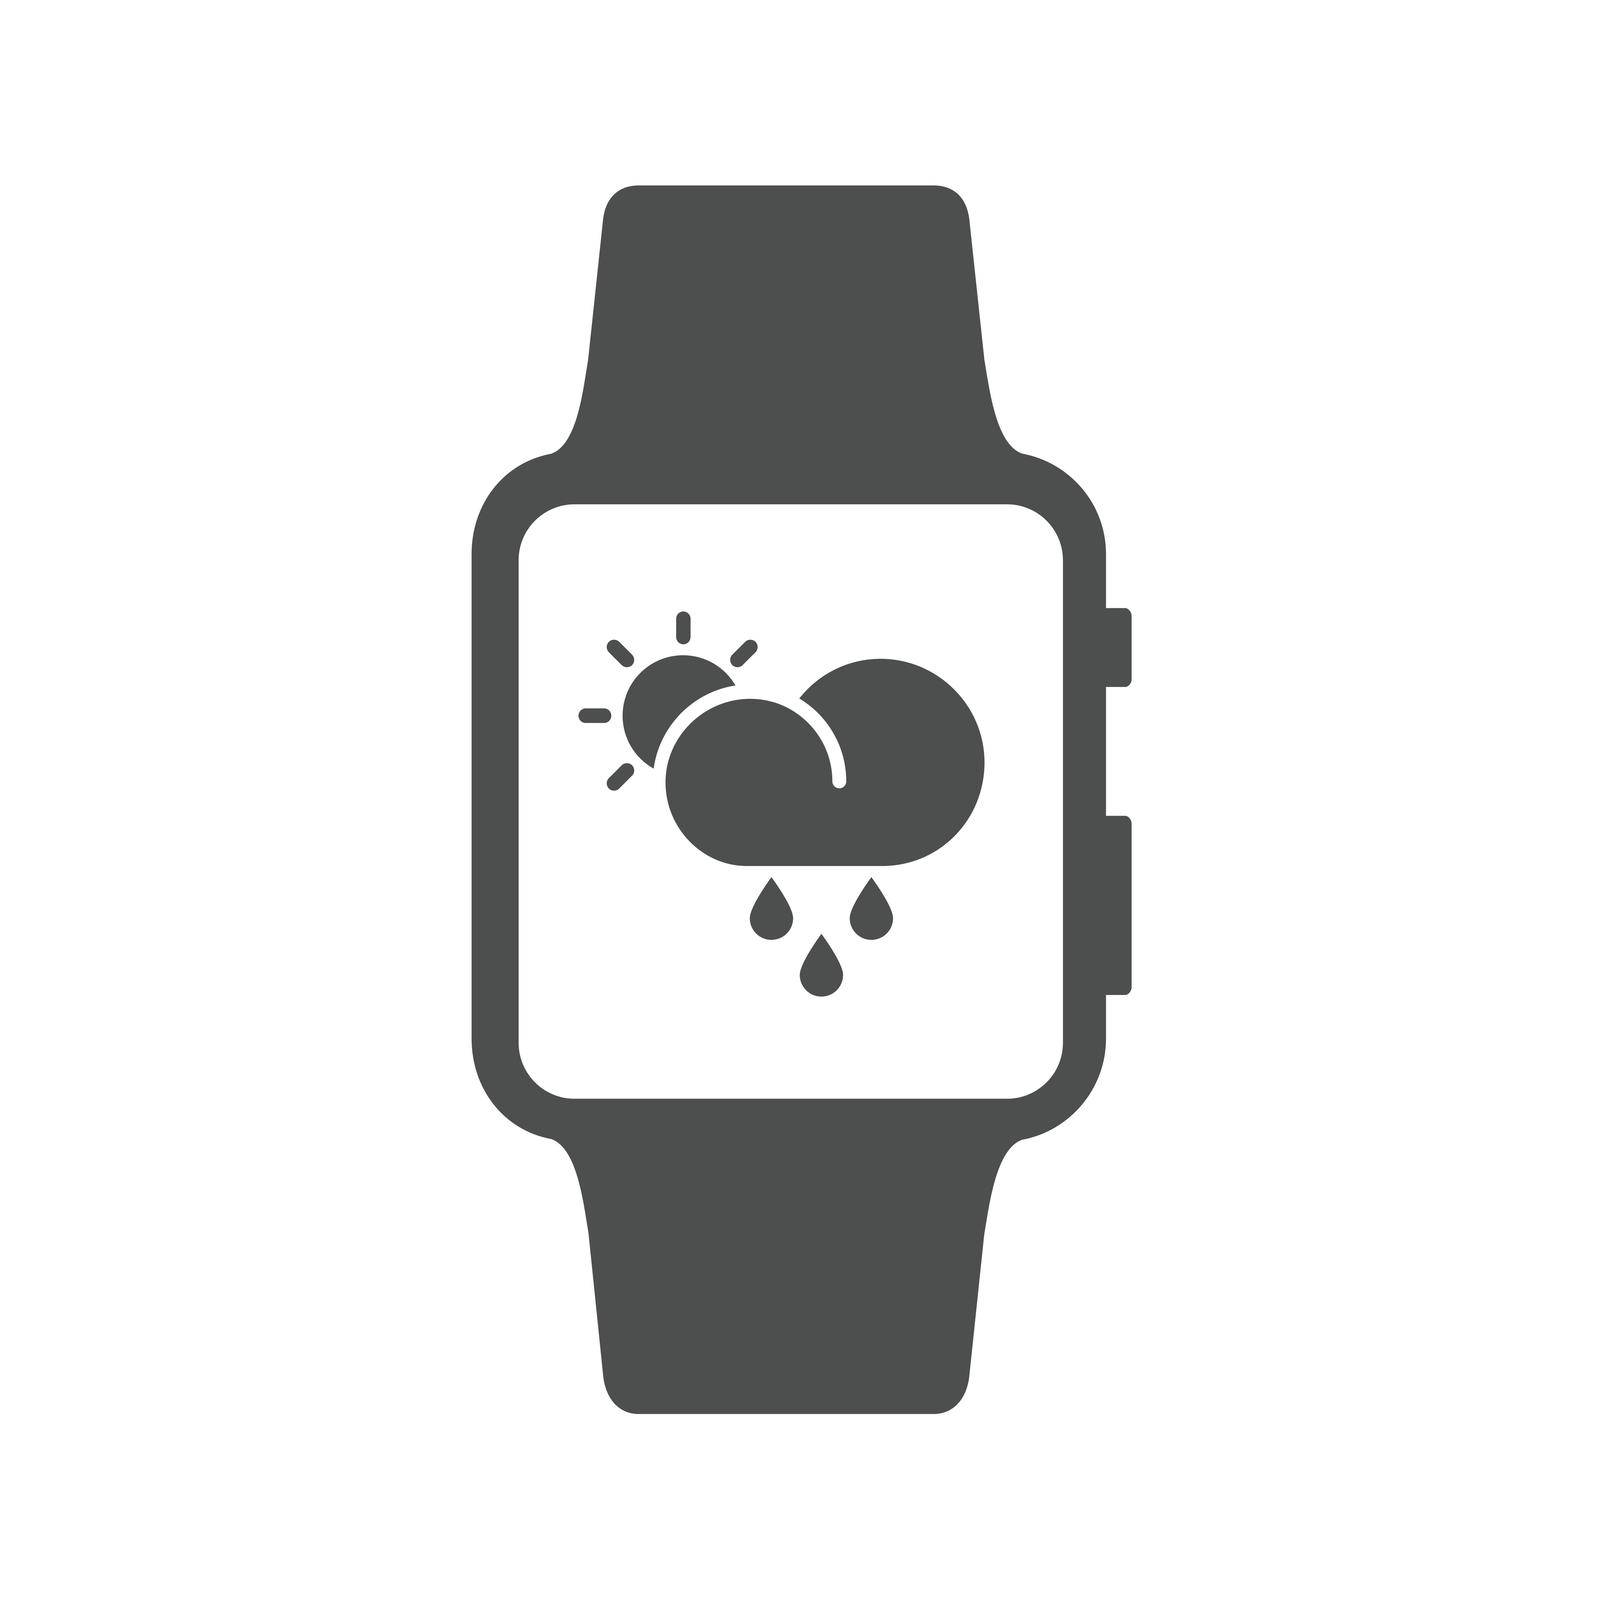 weather forecast on smart watch vector icon isolated on white background. web icon for mobile and ui design